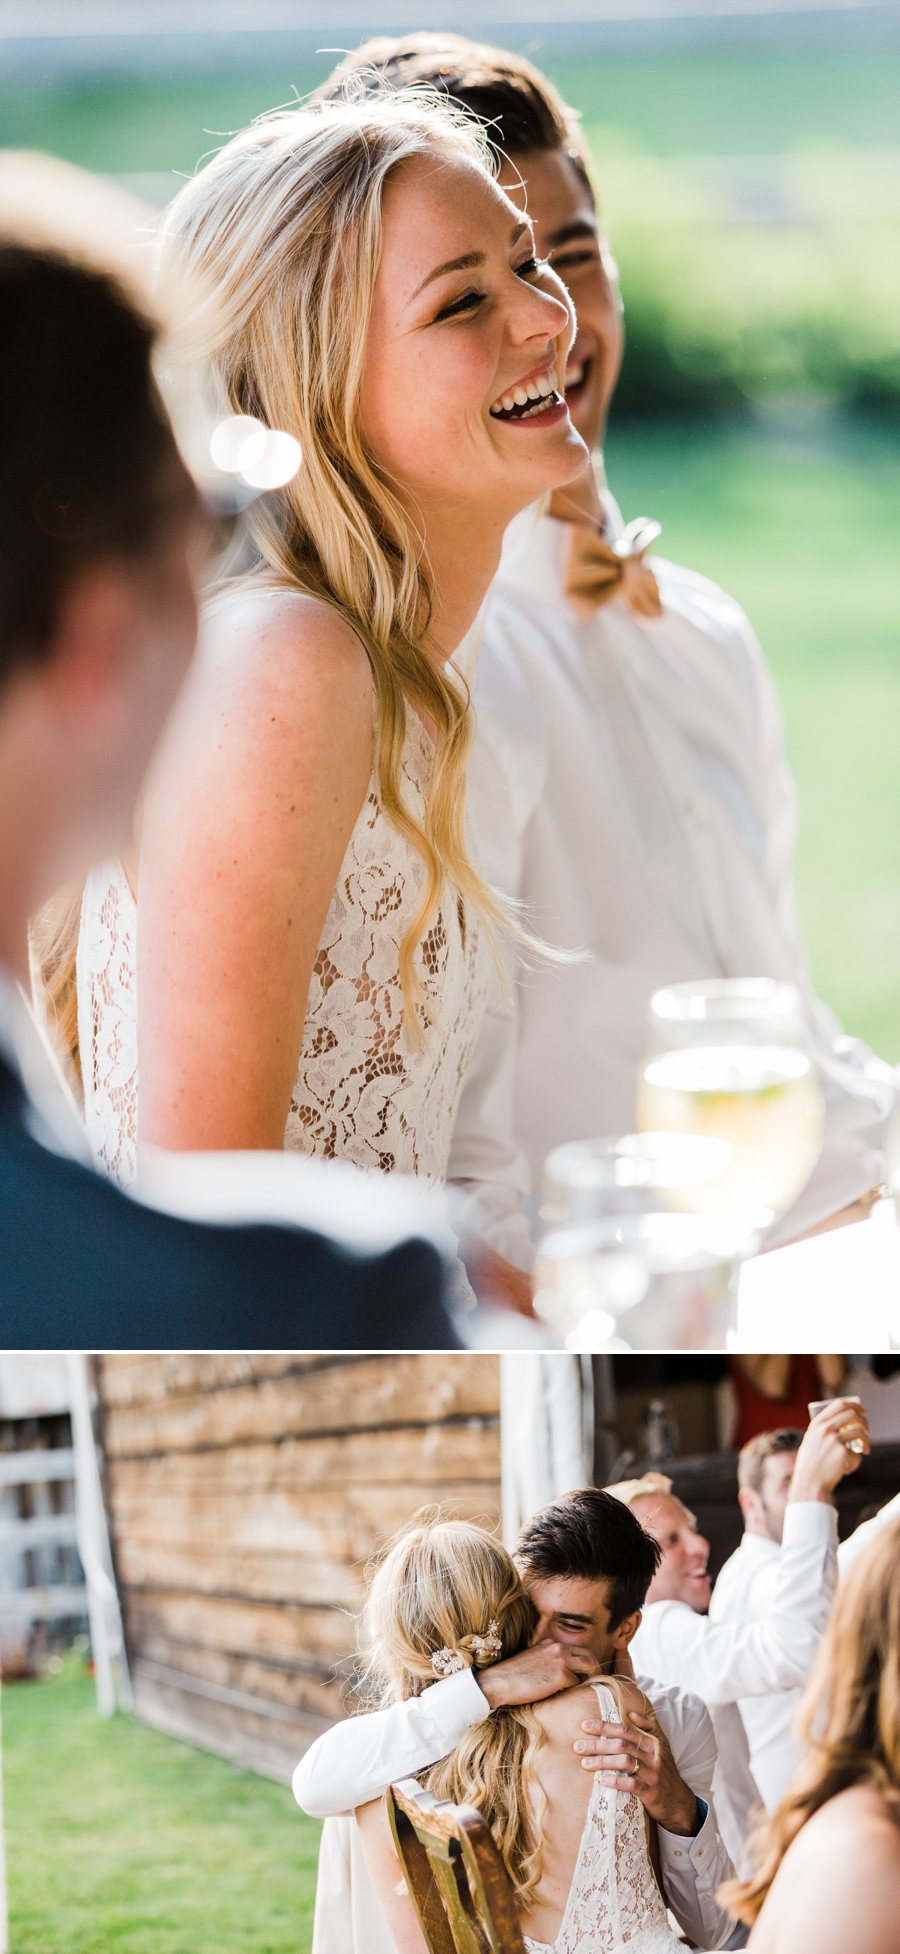 A bride laughs as she listens to toasts on her wedding day